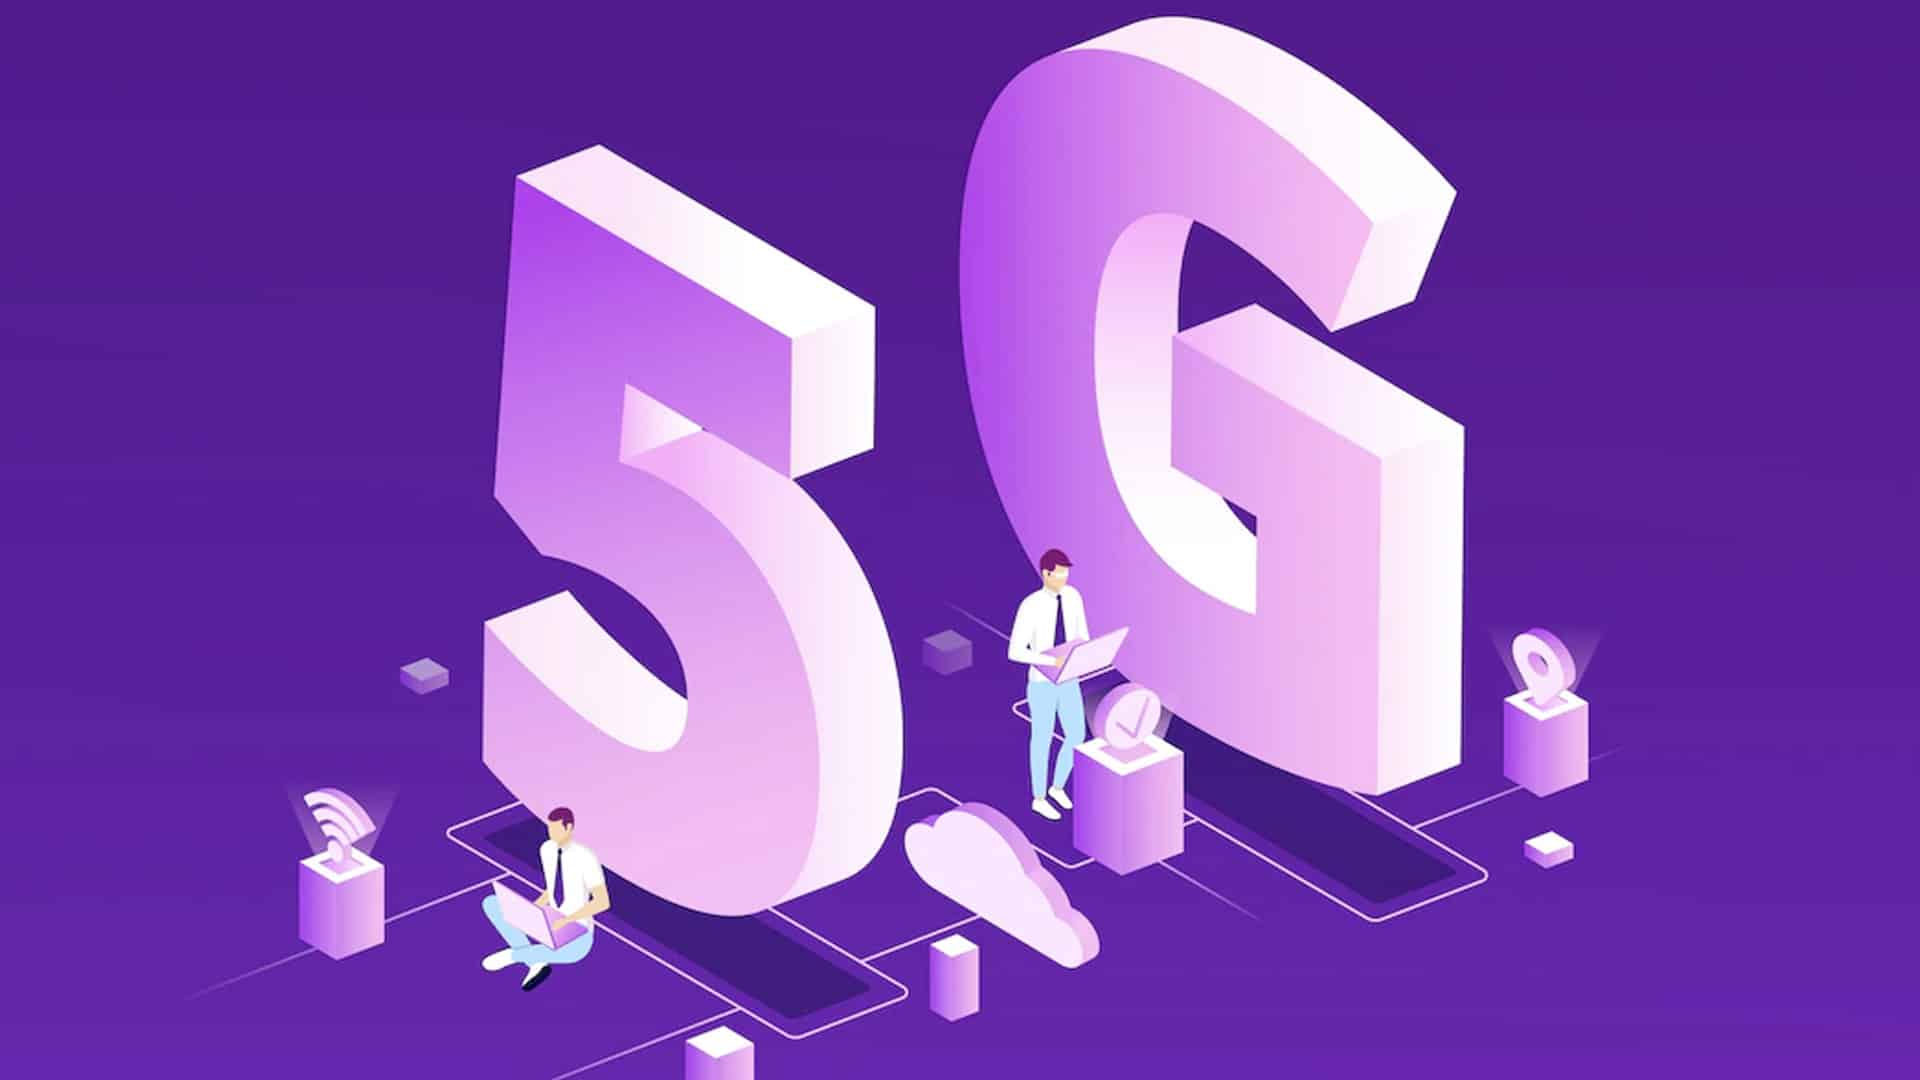 DoT, Meity to hold joint meeting of smartphone firms, telecom operators to resolve 5G issues